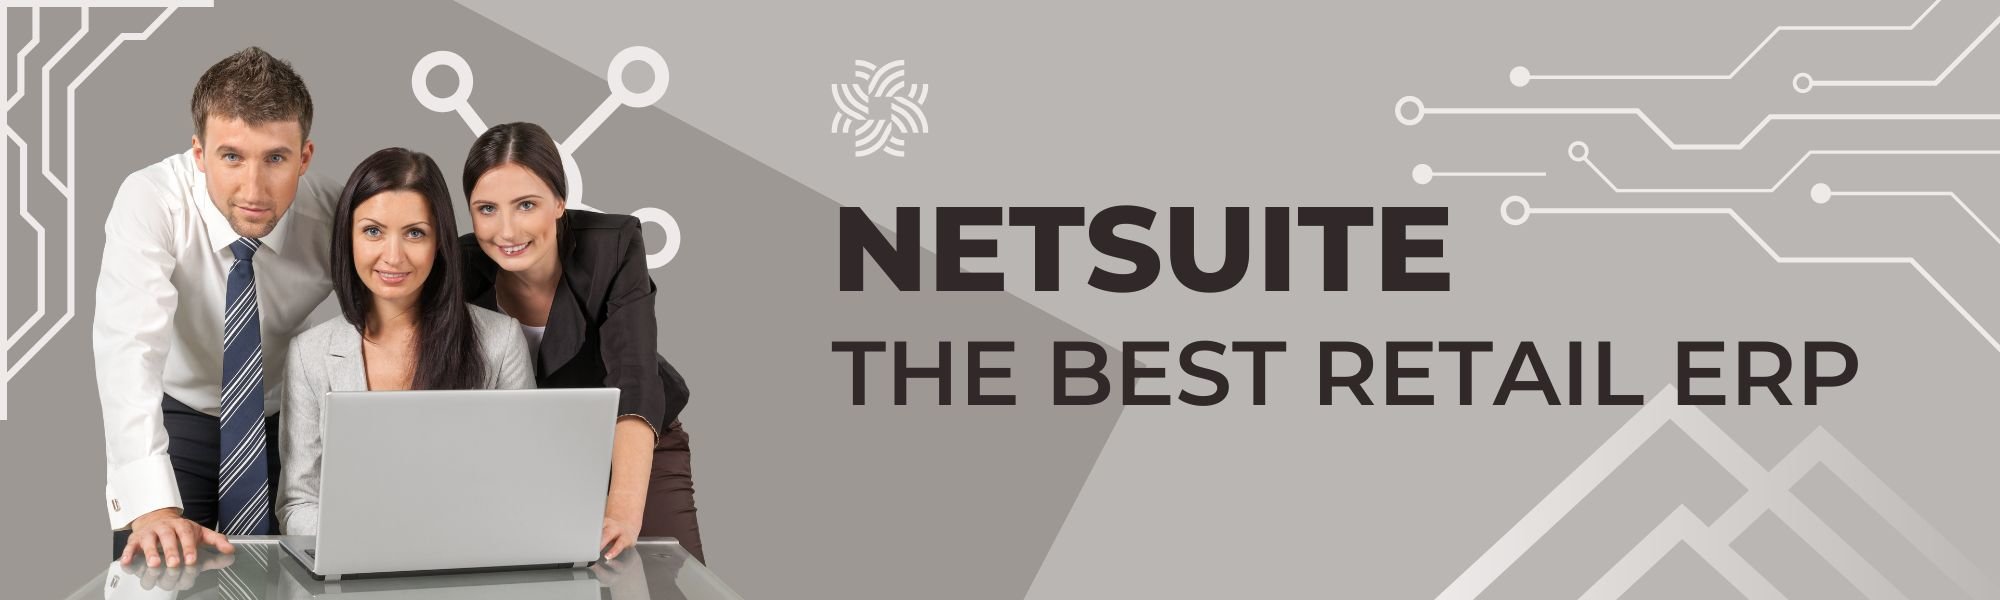 NetSuite Is The Best Retail ERP